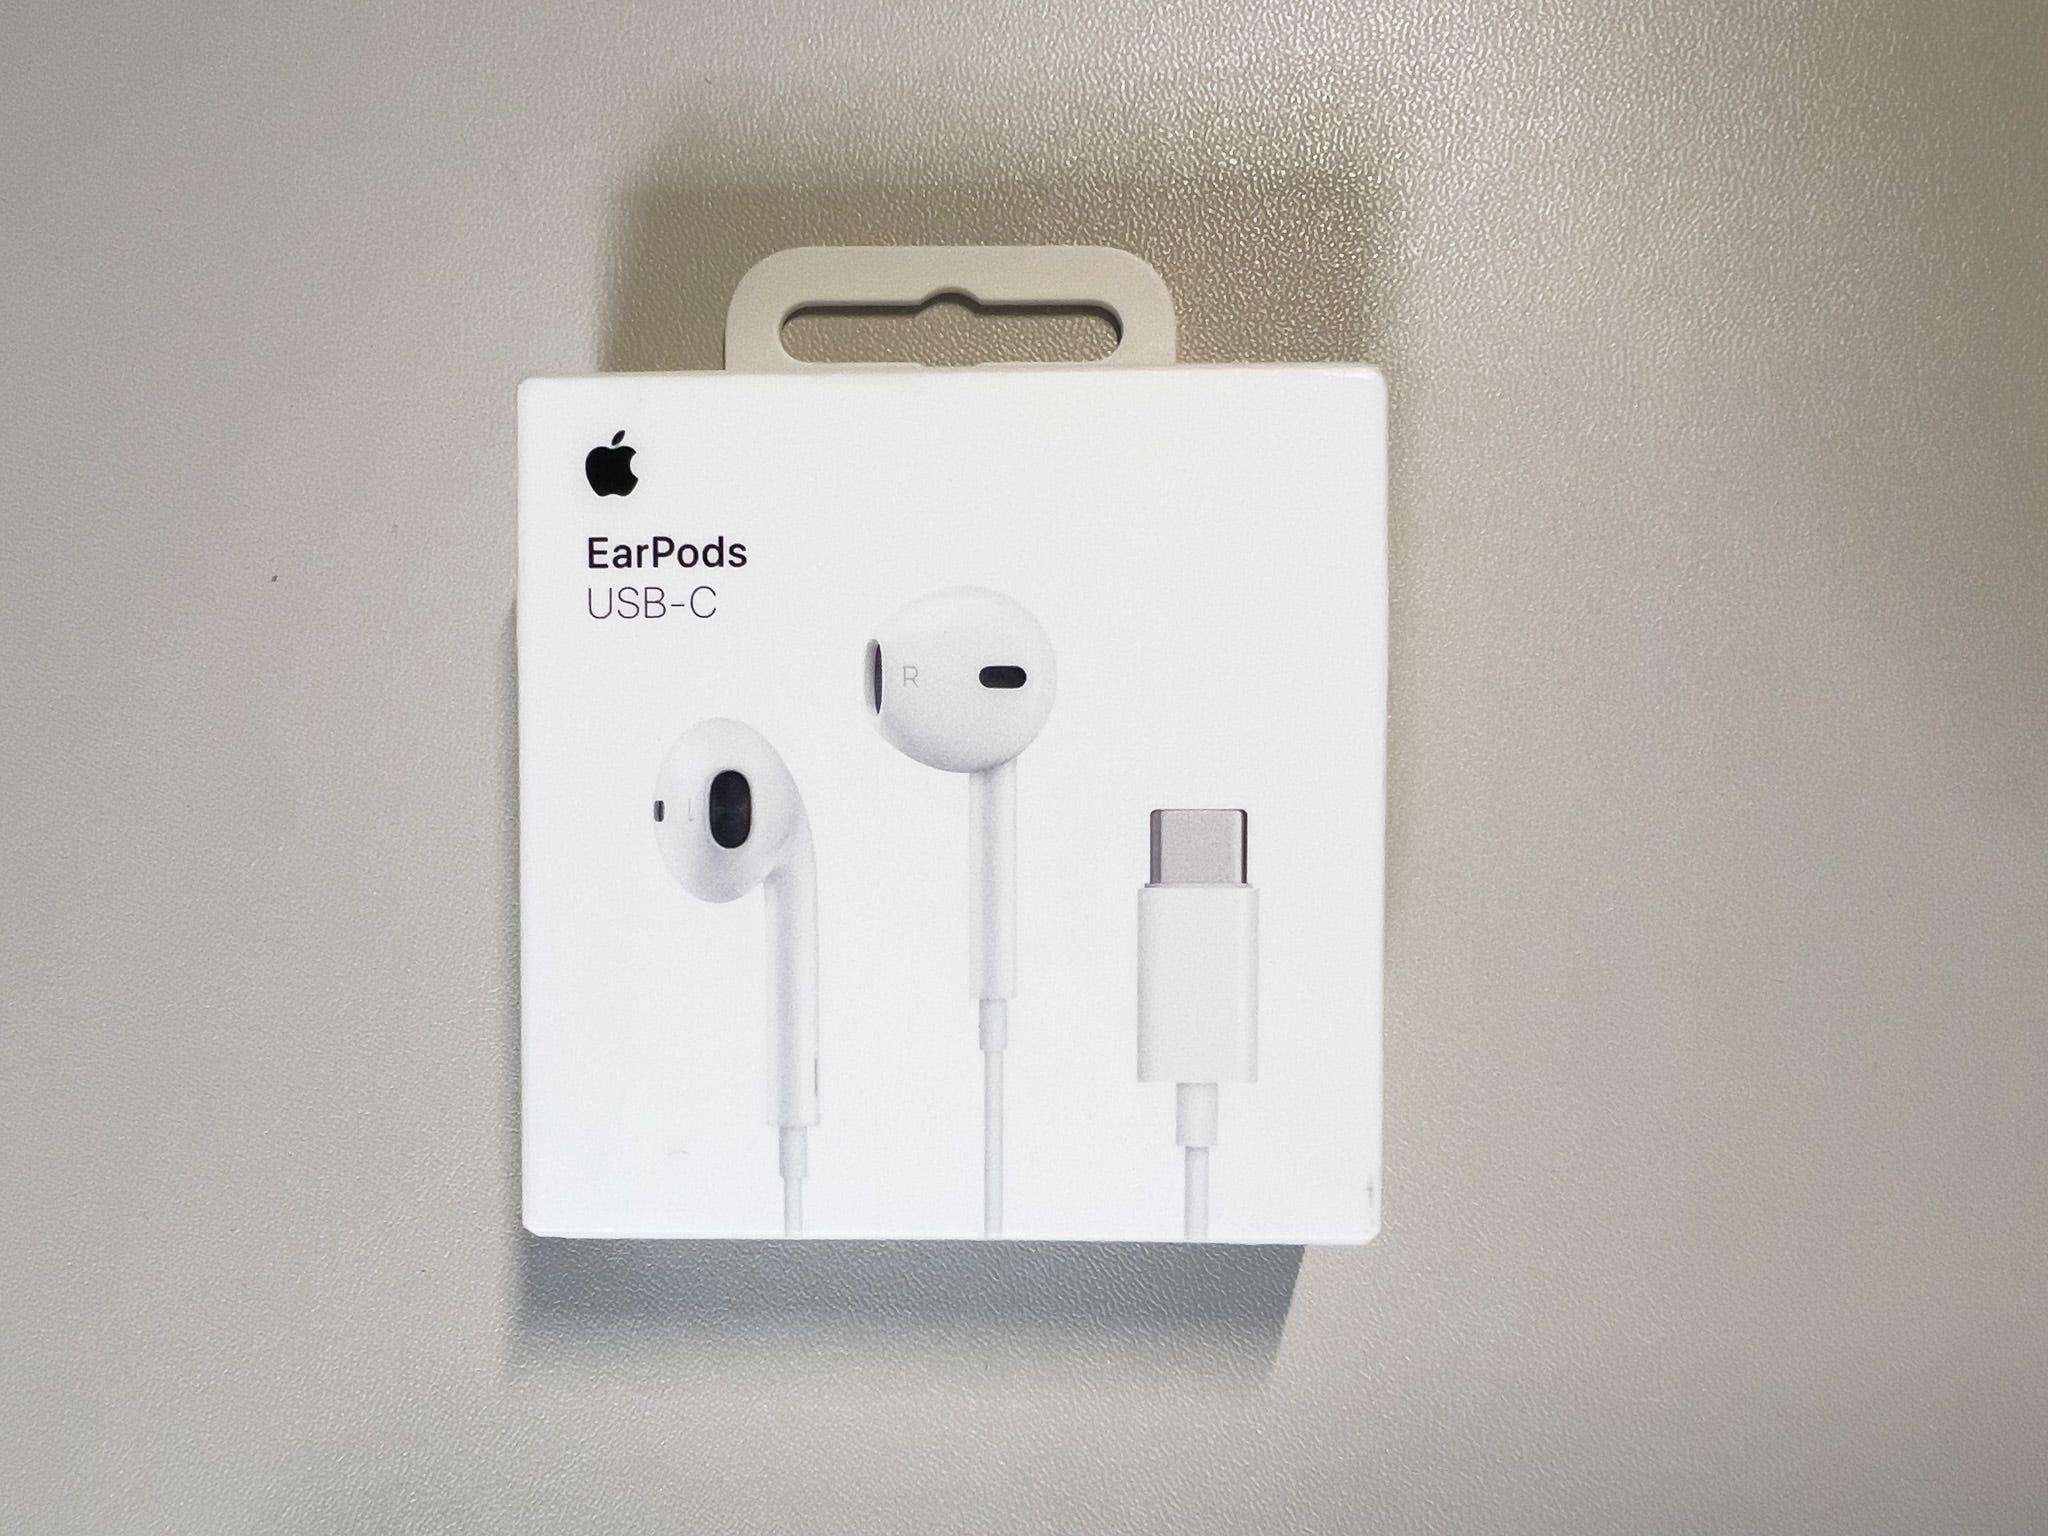 Apple's new $19 EarPods are a smarter purchase than the $549